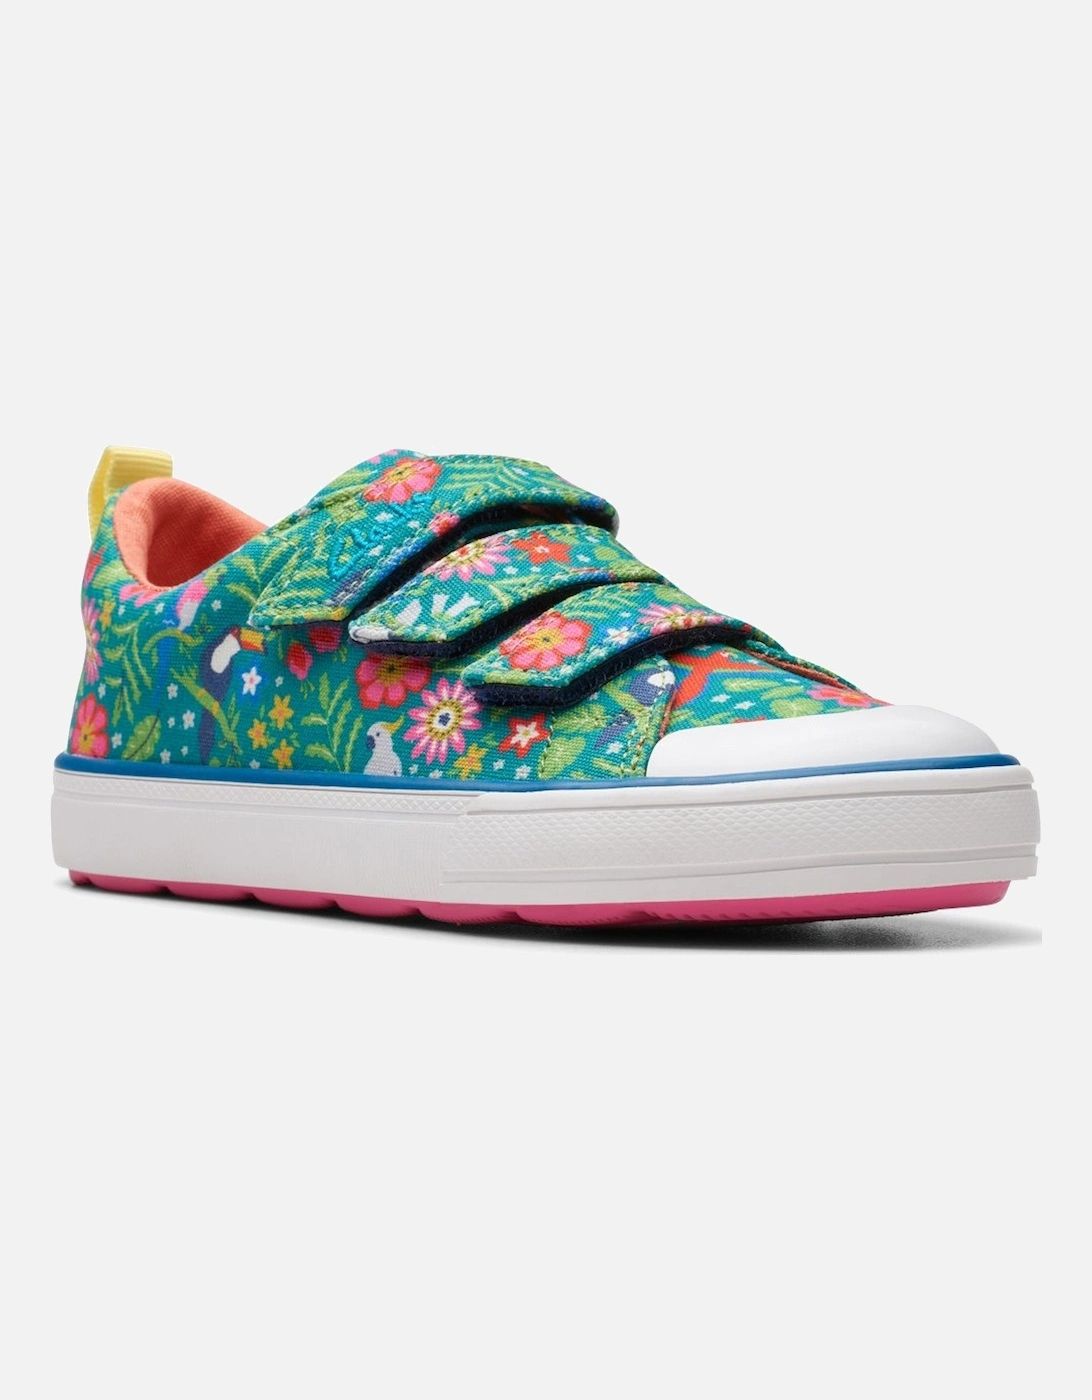 Foxing Tropic K Girls Canvas Shoes, 8 of 7